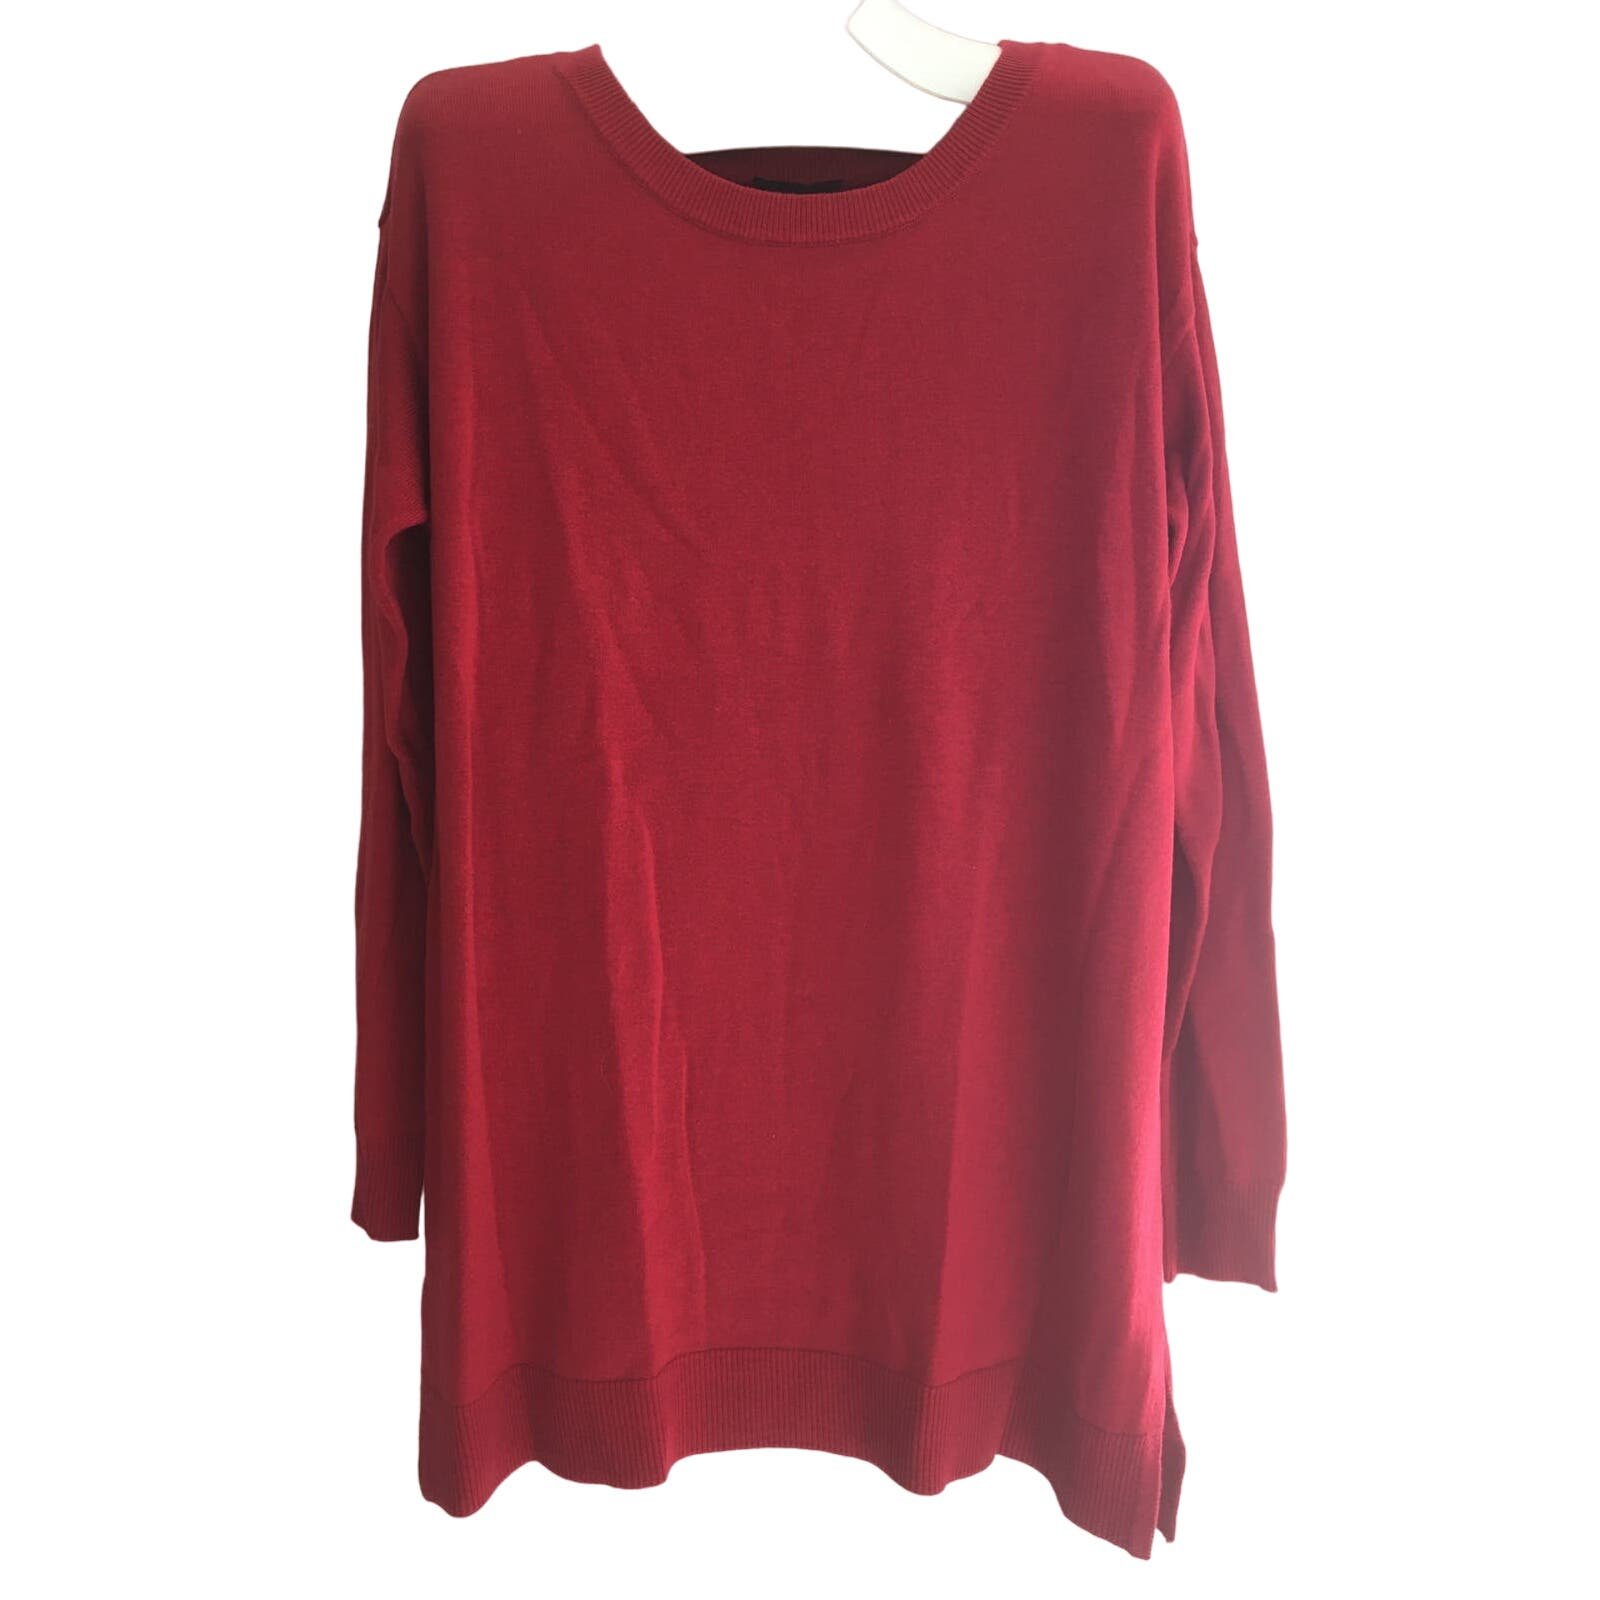 Custom NWT Intro Love The Fit Medium Red Sweater Ribbed